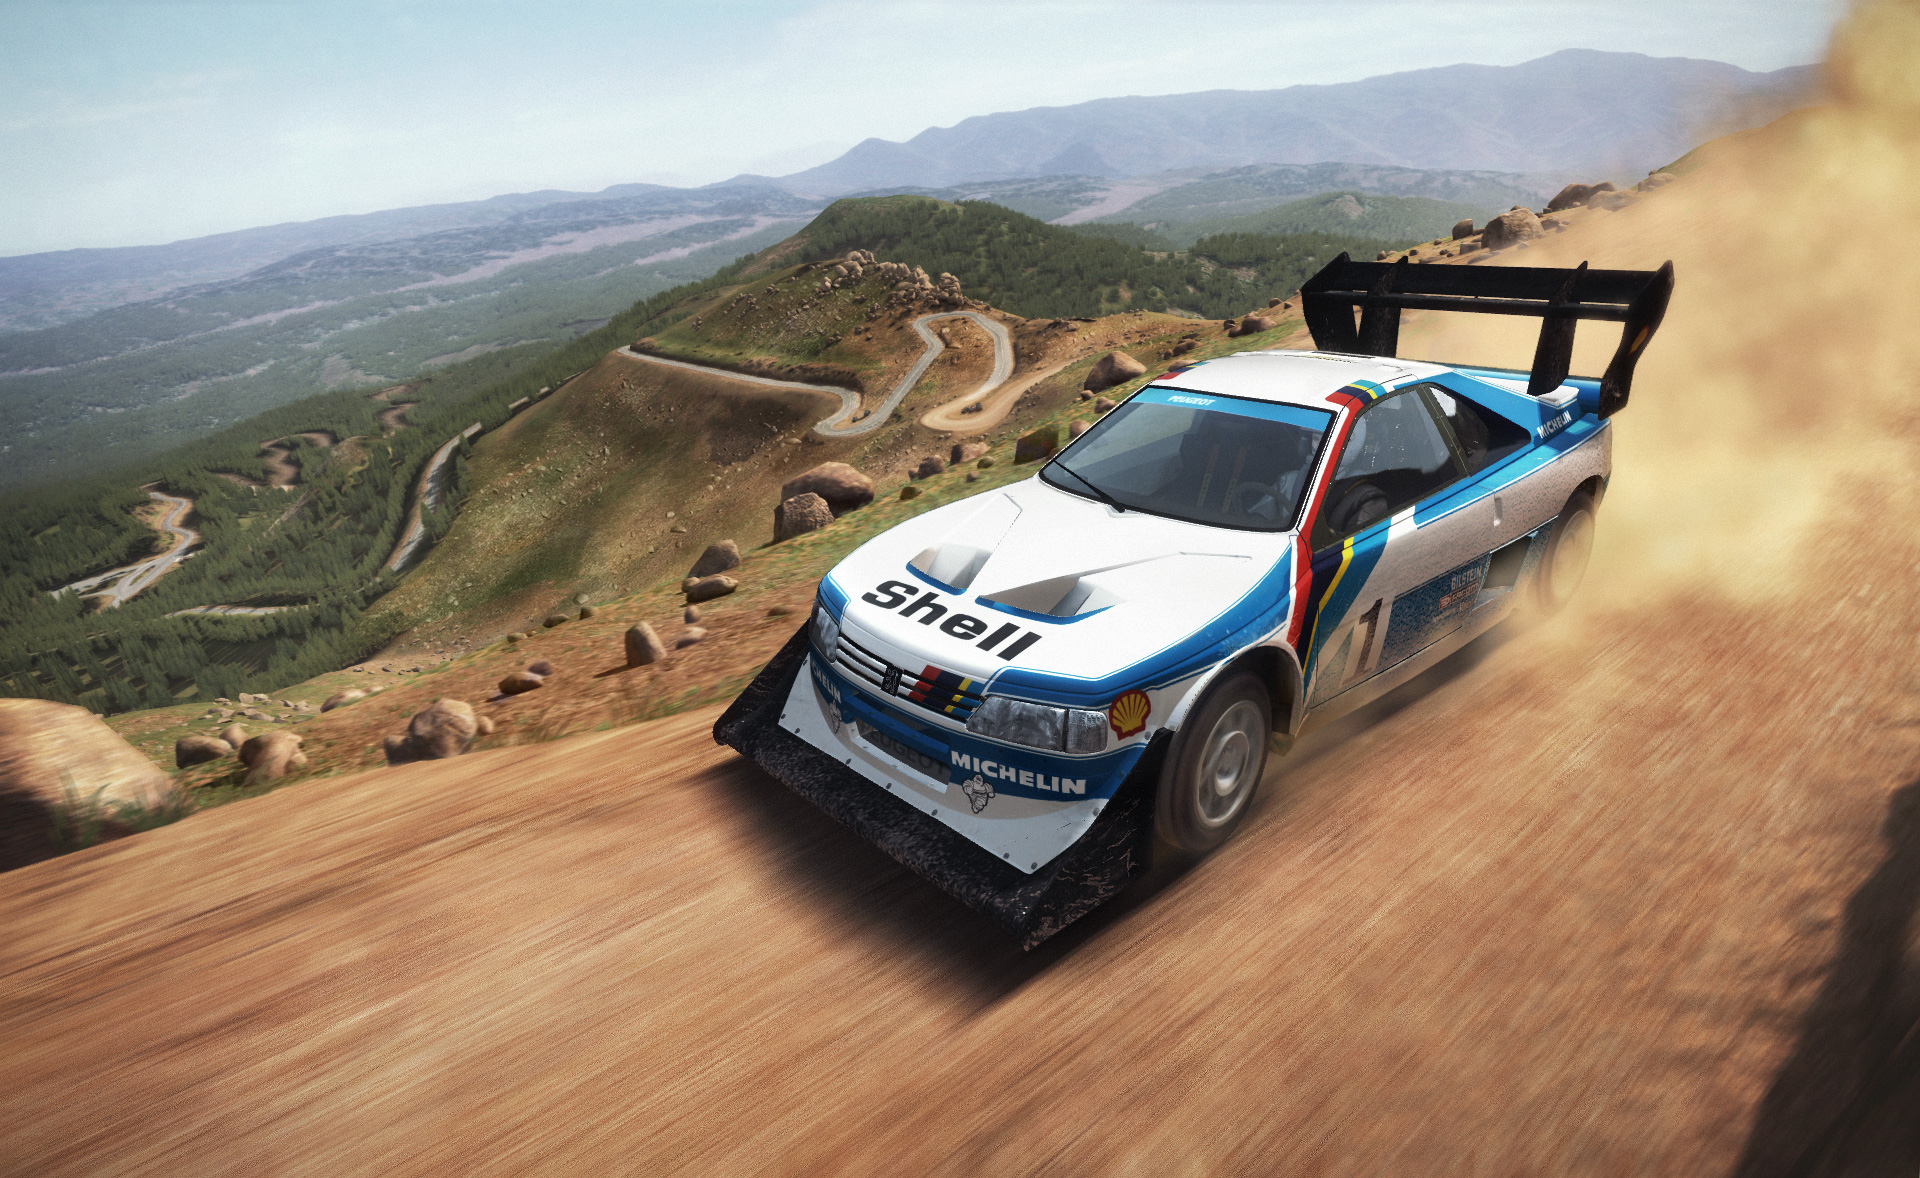 DiRT Rally Backgrounds, Compatible - PC, Mobile, Gadgets| 1920x1178 px